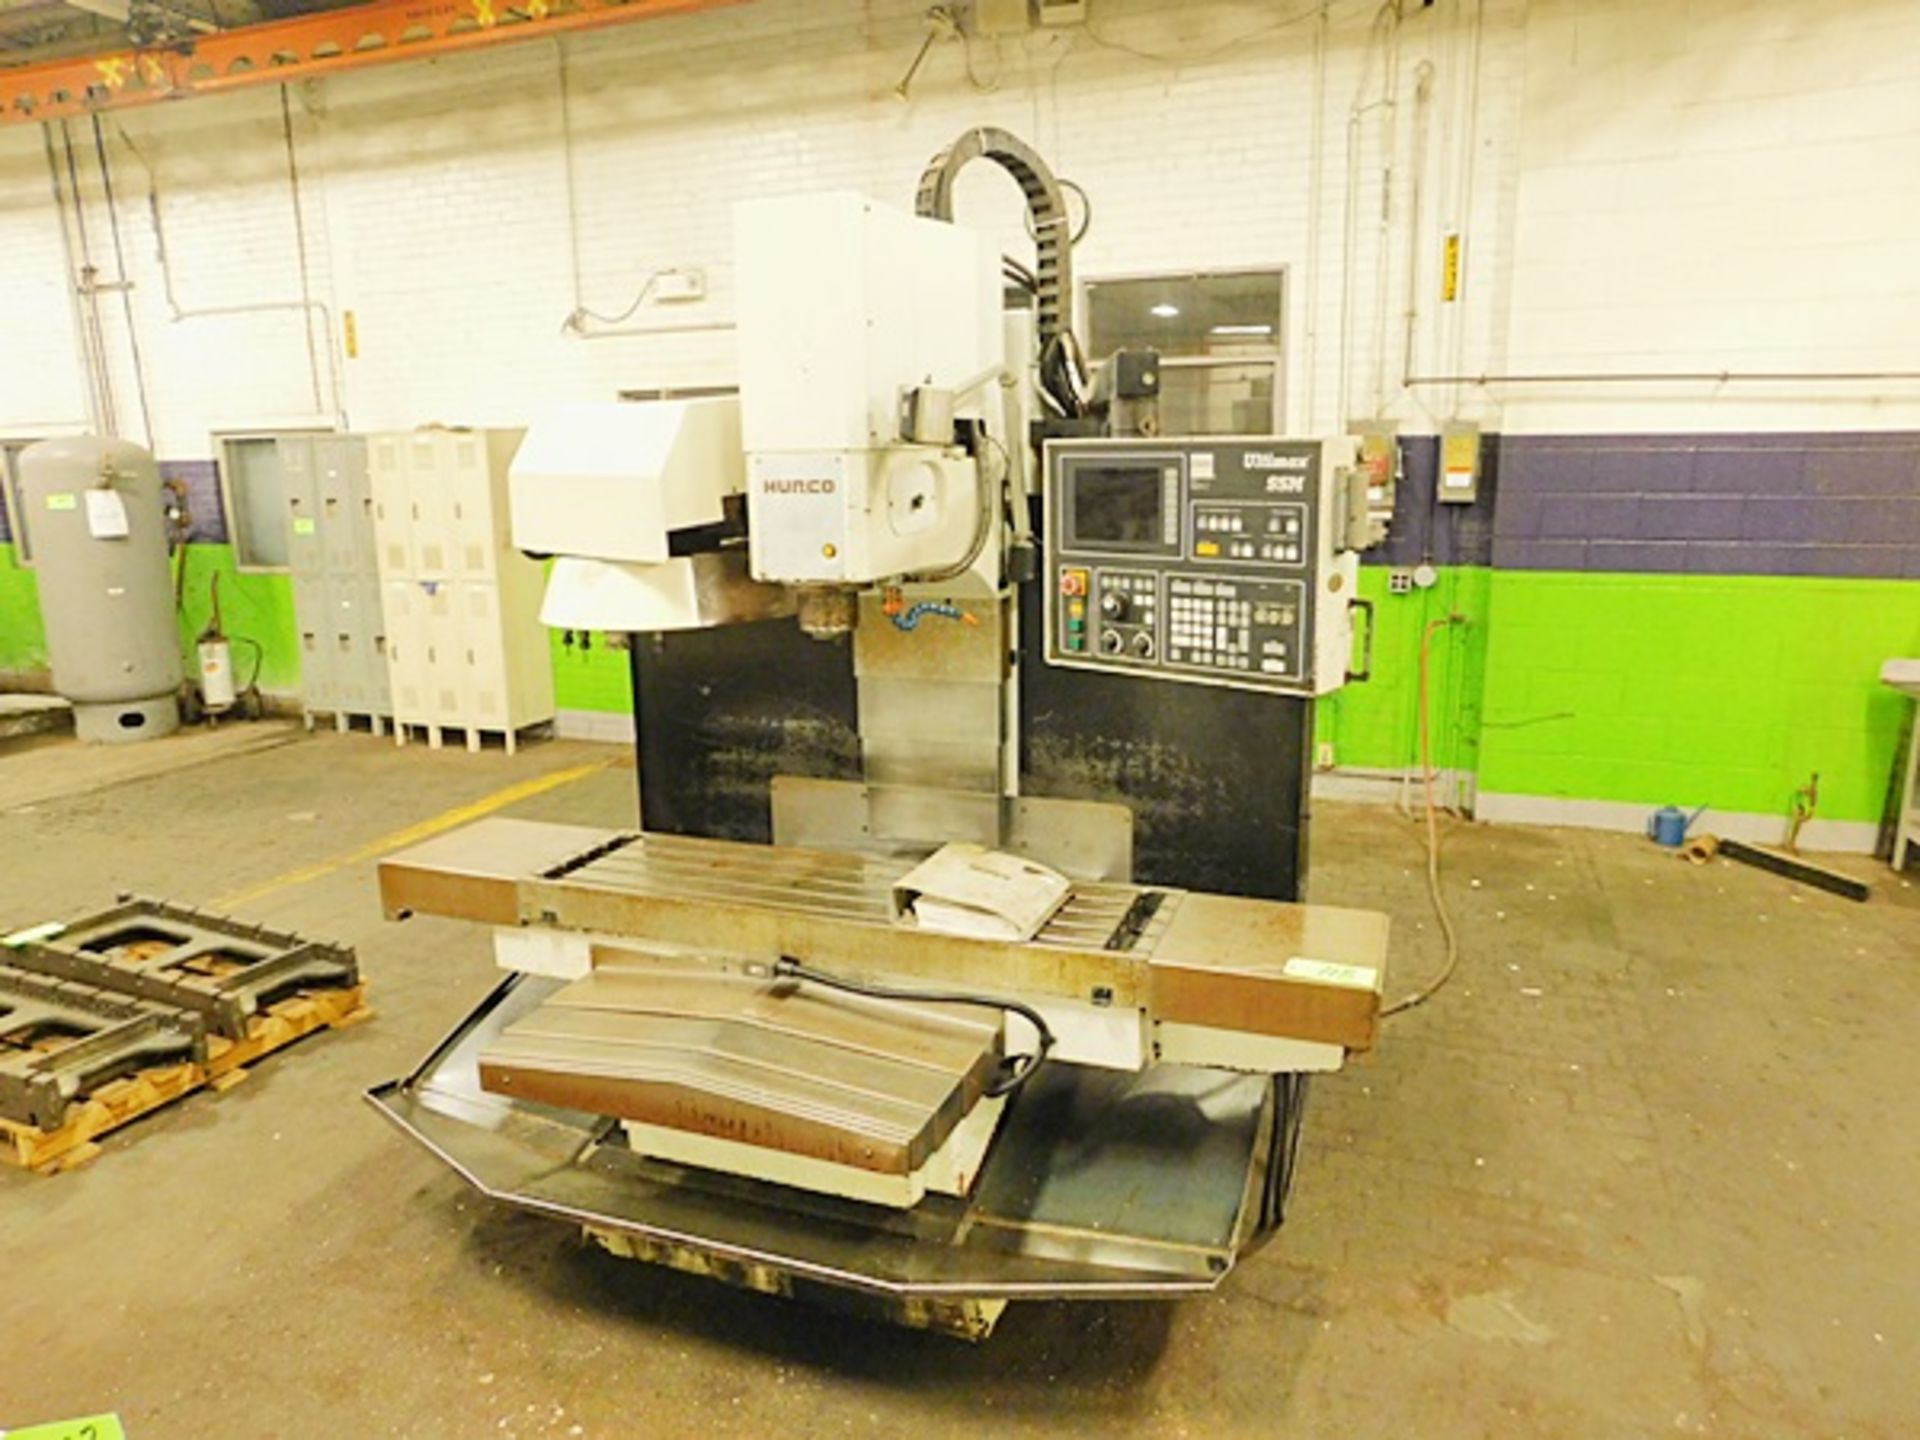 Hurco CSX50 3-Axis Vertical Machining Center with 16'' x 58'' T-Slotted Table, X-50'', Y-22'', Z-